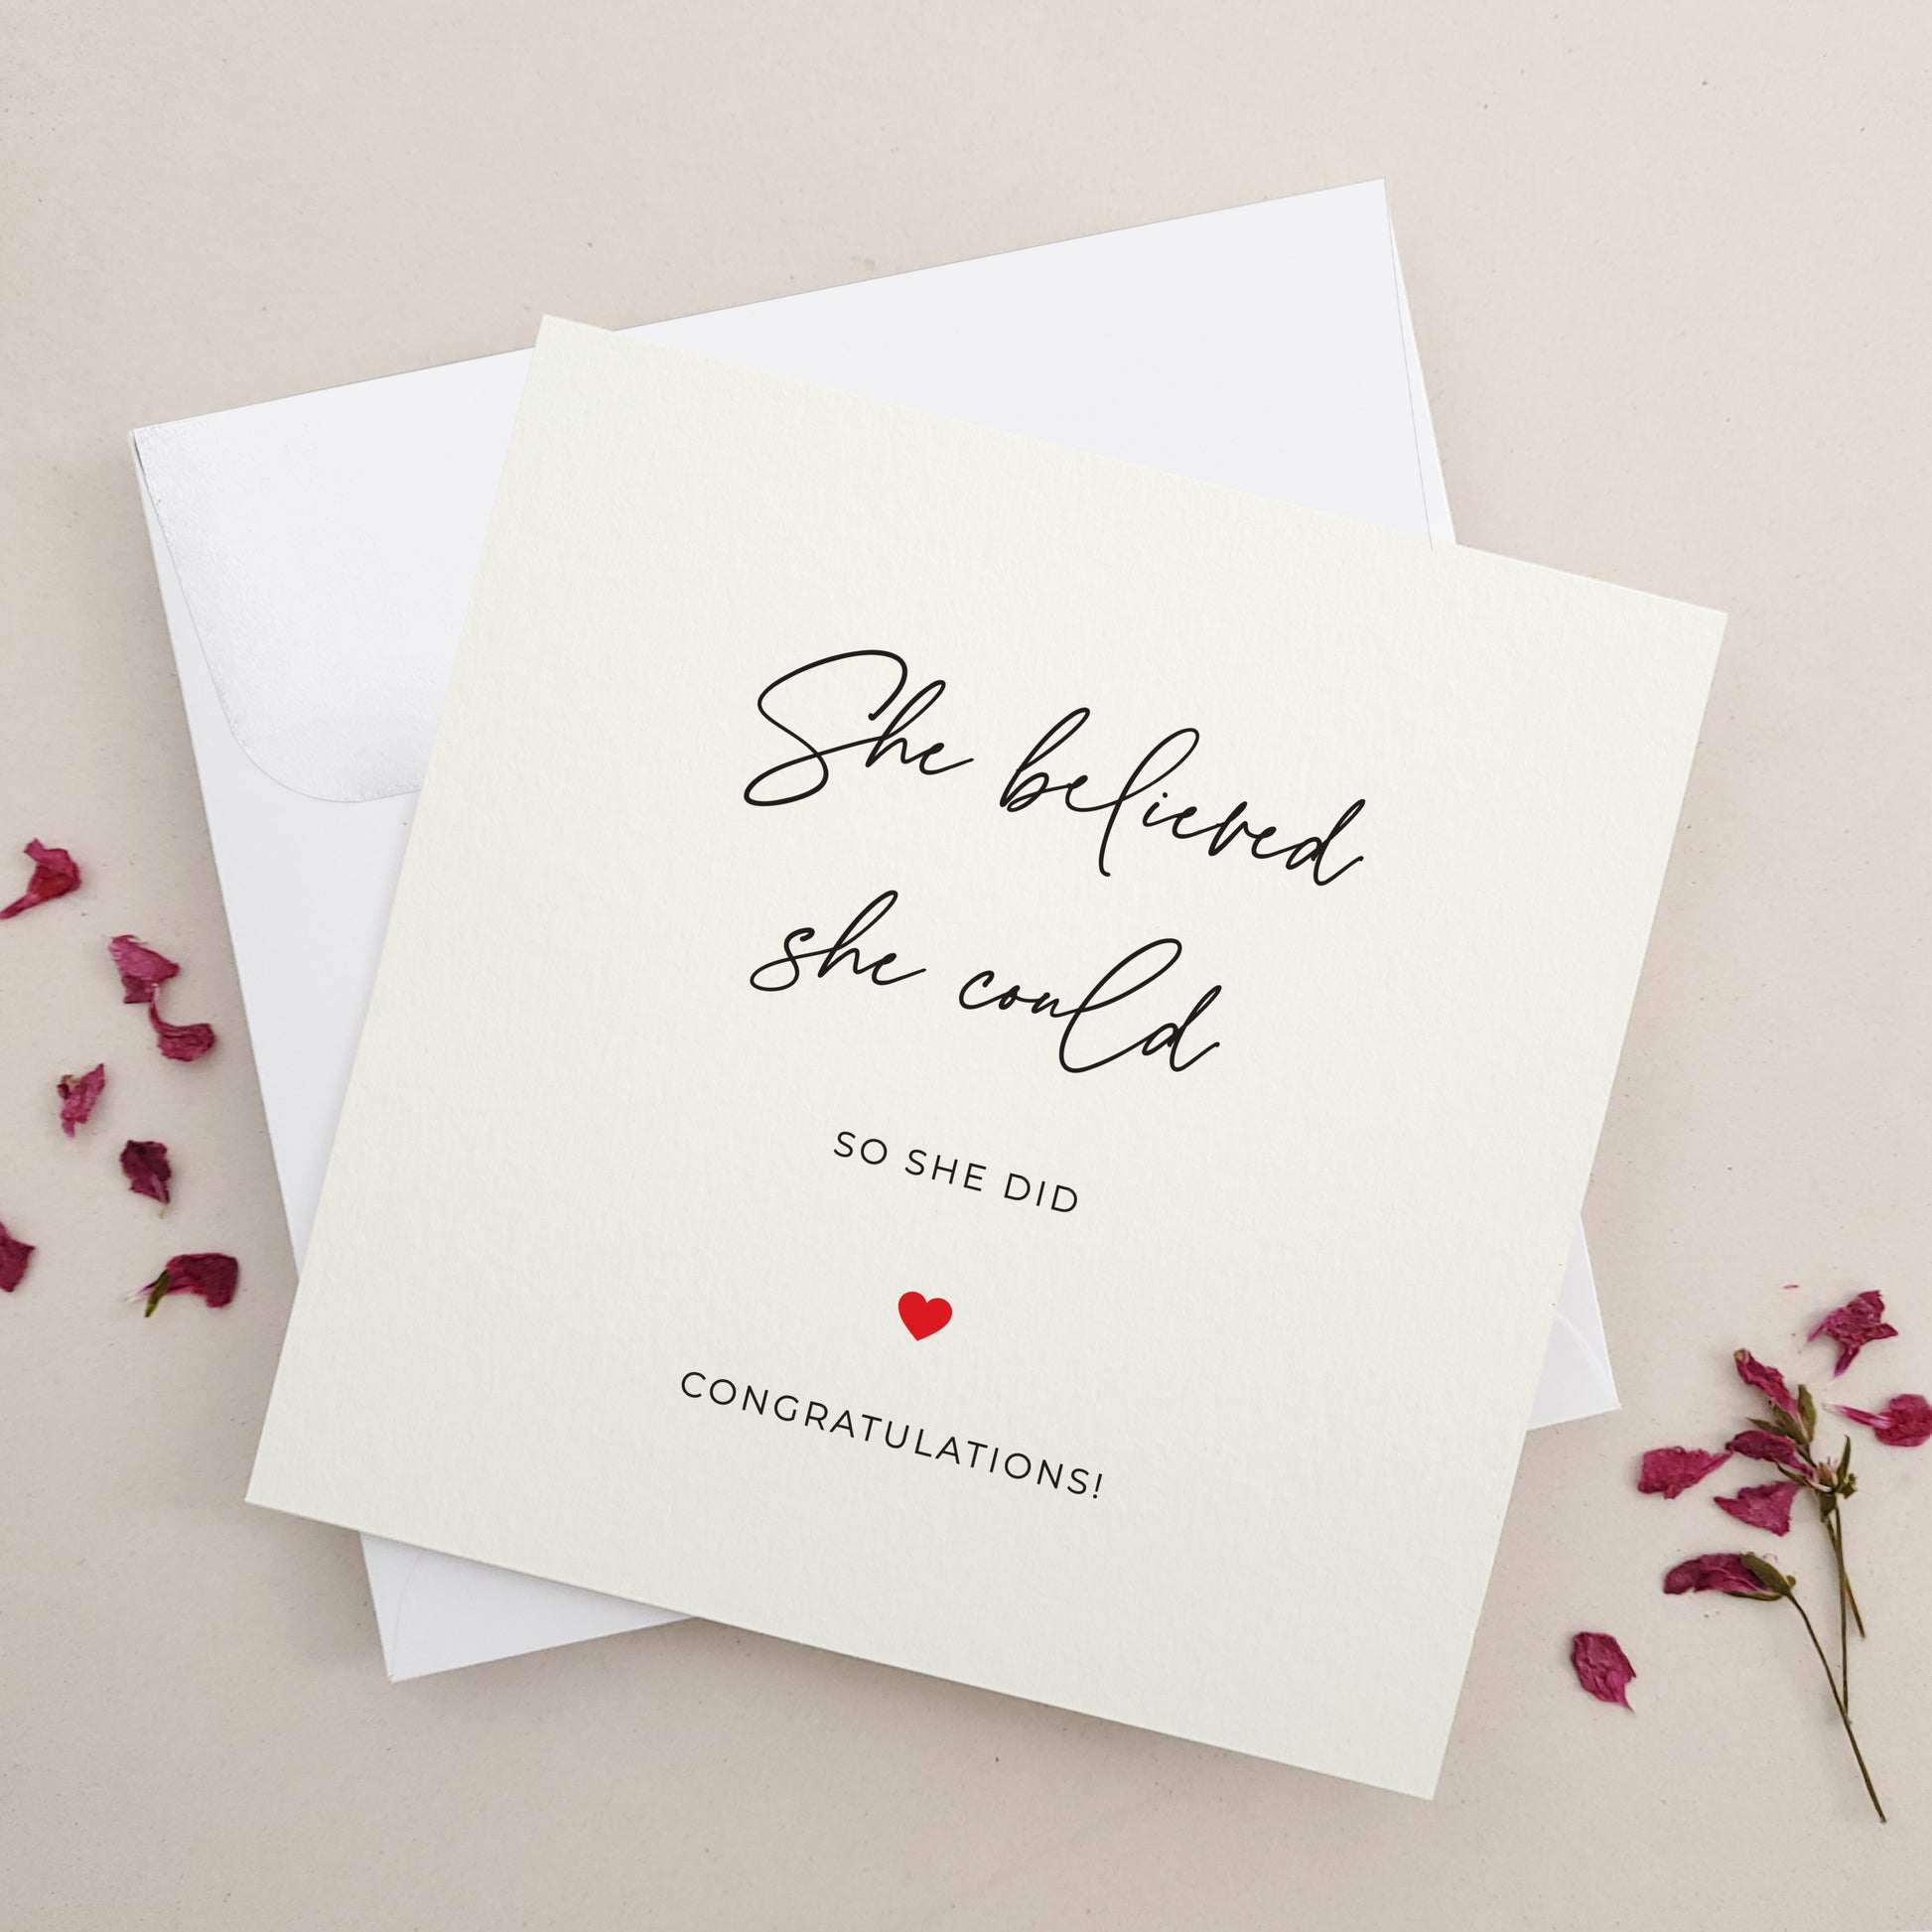 she believed she could so she did congratulations card -  XOXOKristen